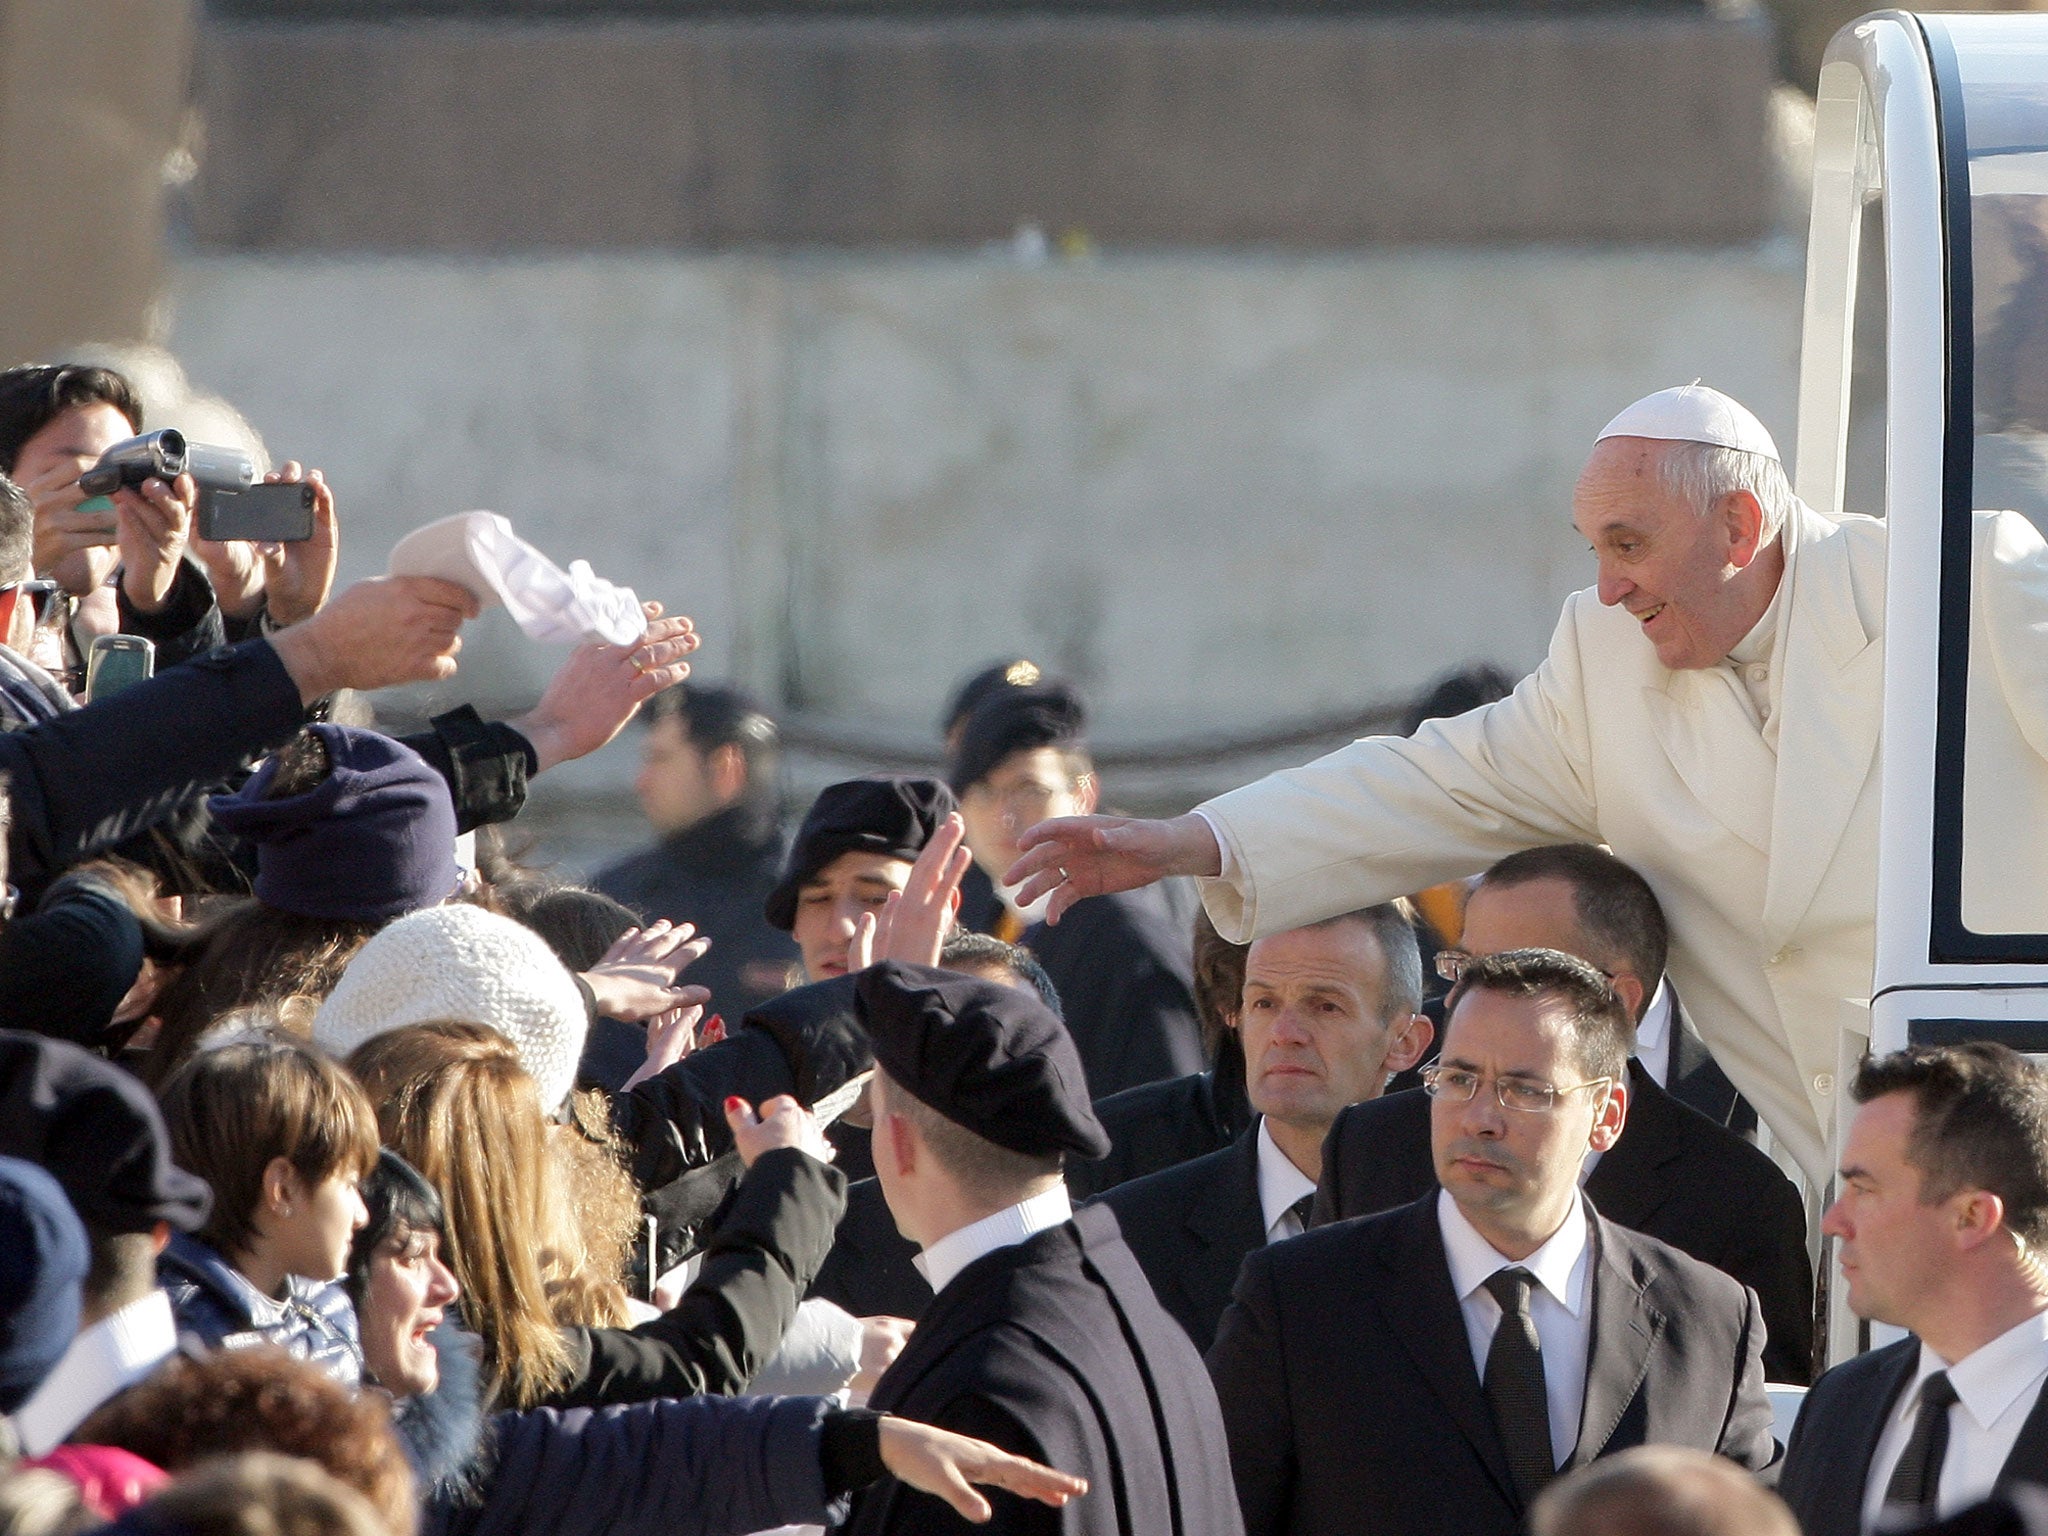 Pope Francis greets the crowd at his weekly Audience in St. Peter's Square in Vatican City.